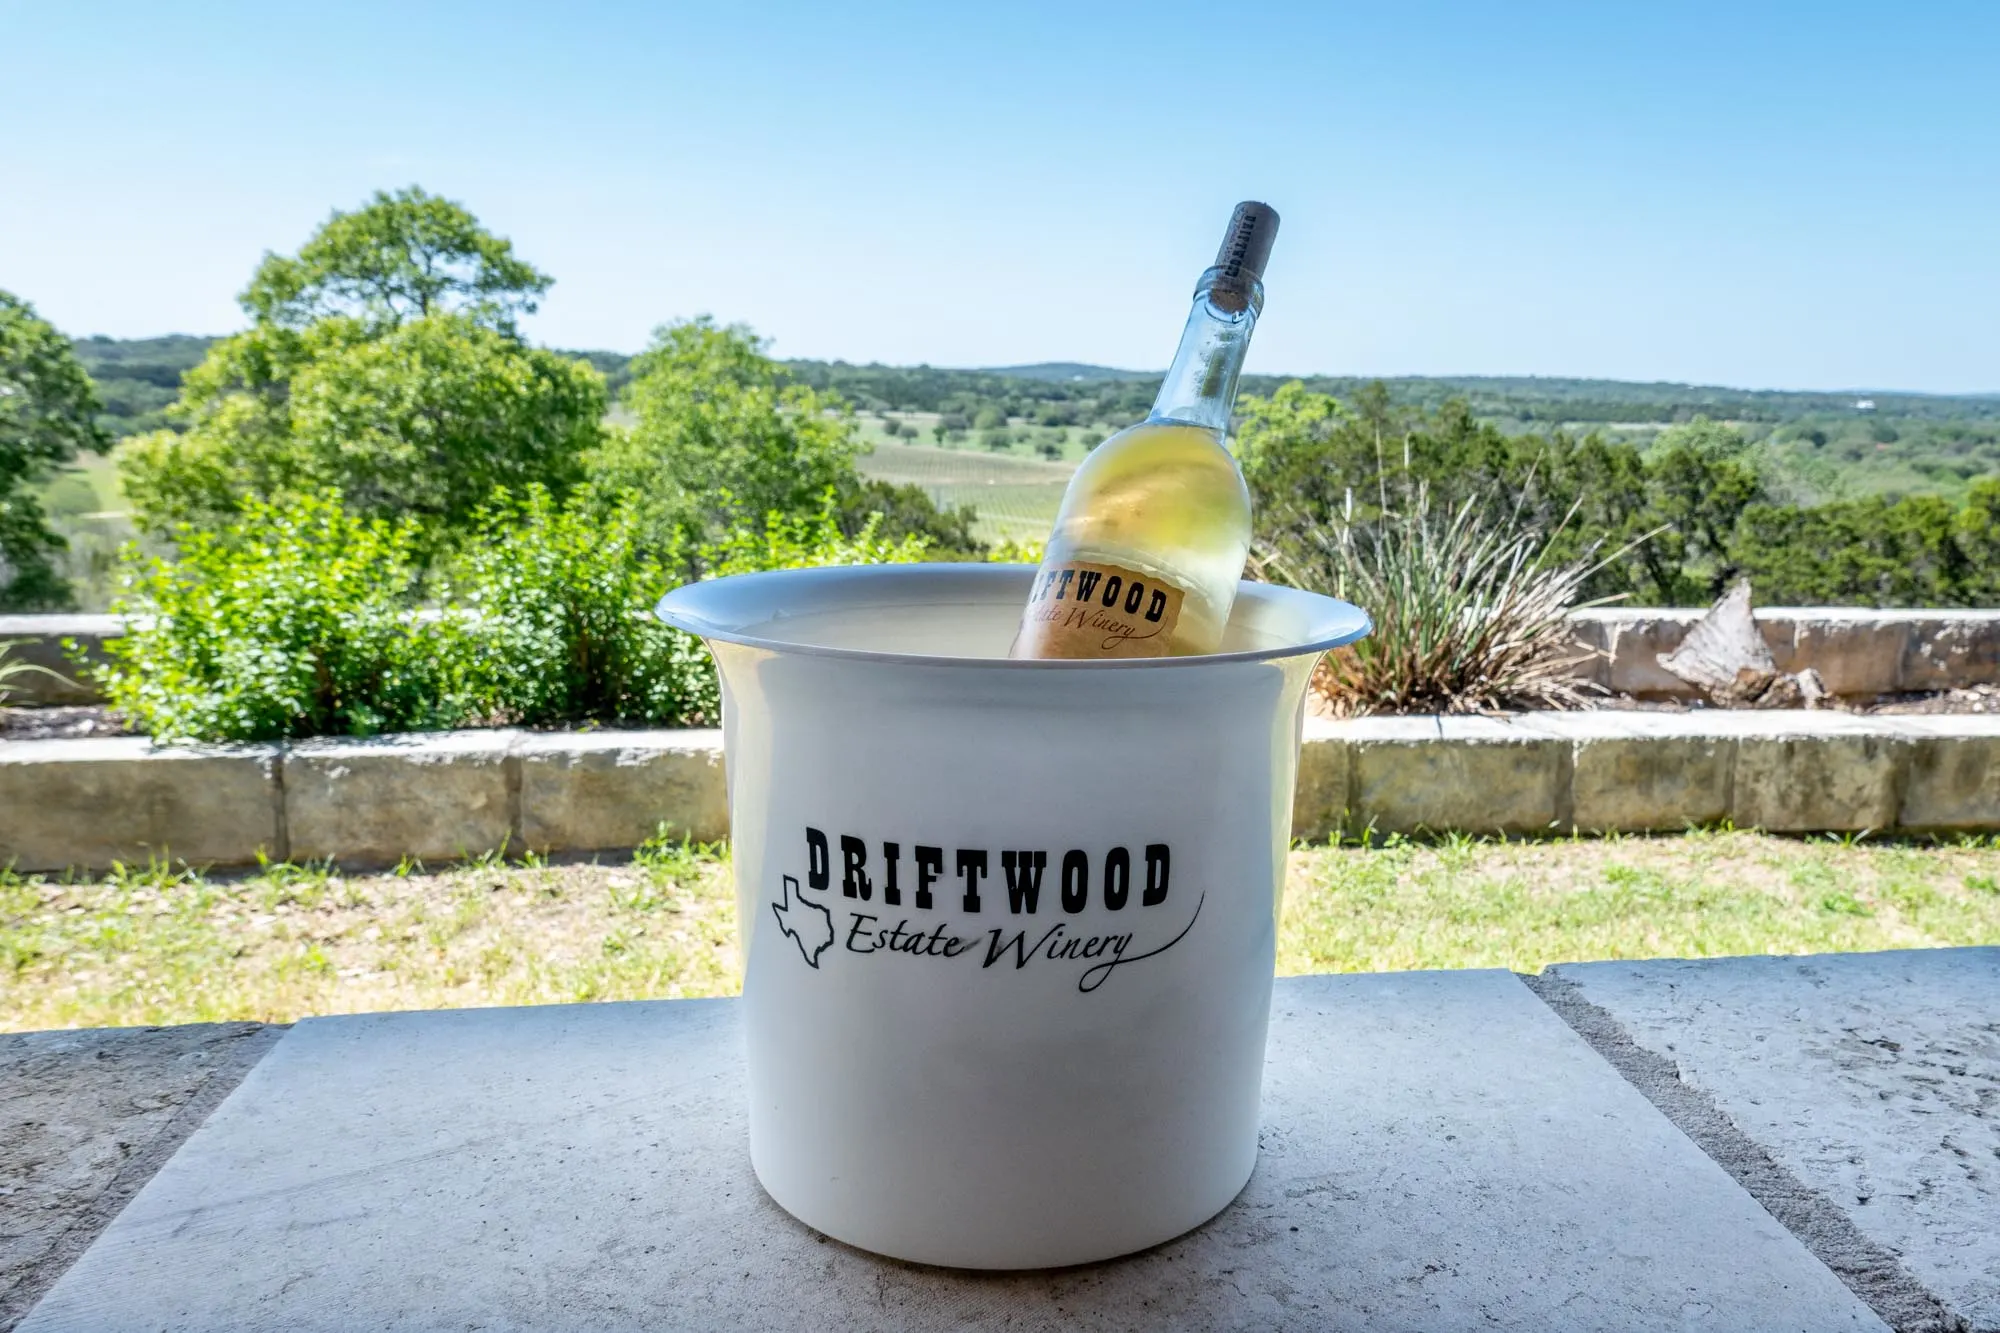 Bottle of white wine in a white ice bucket labeled "Driftwood Estate Winery"